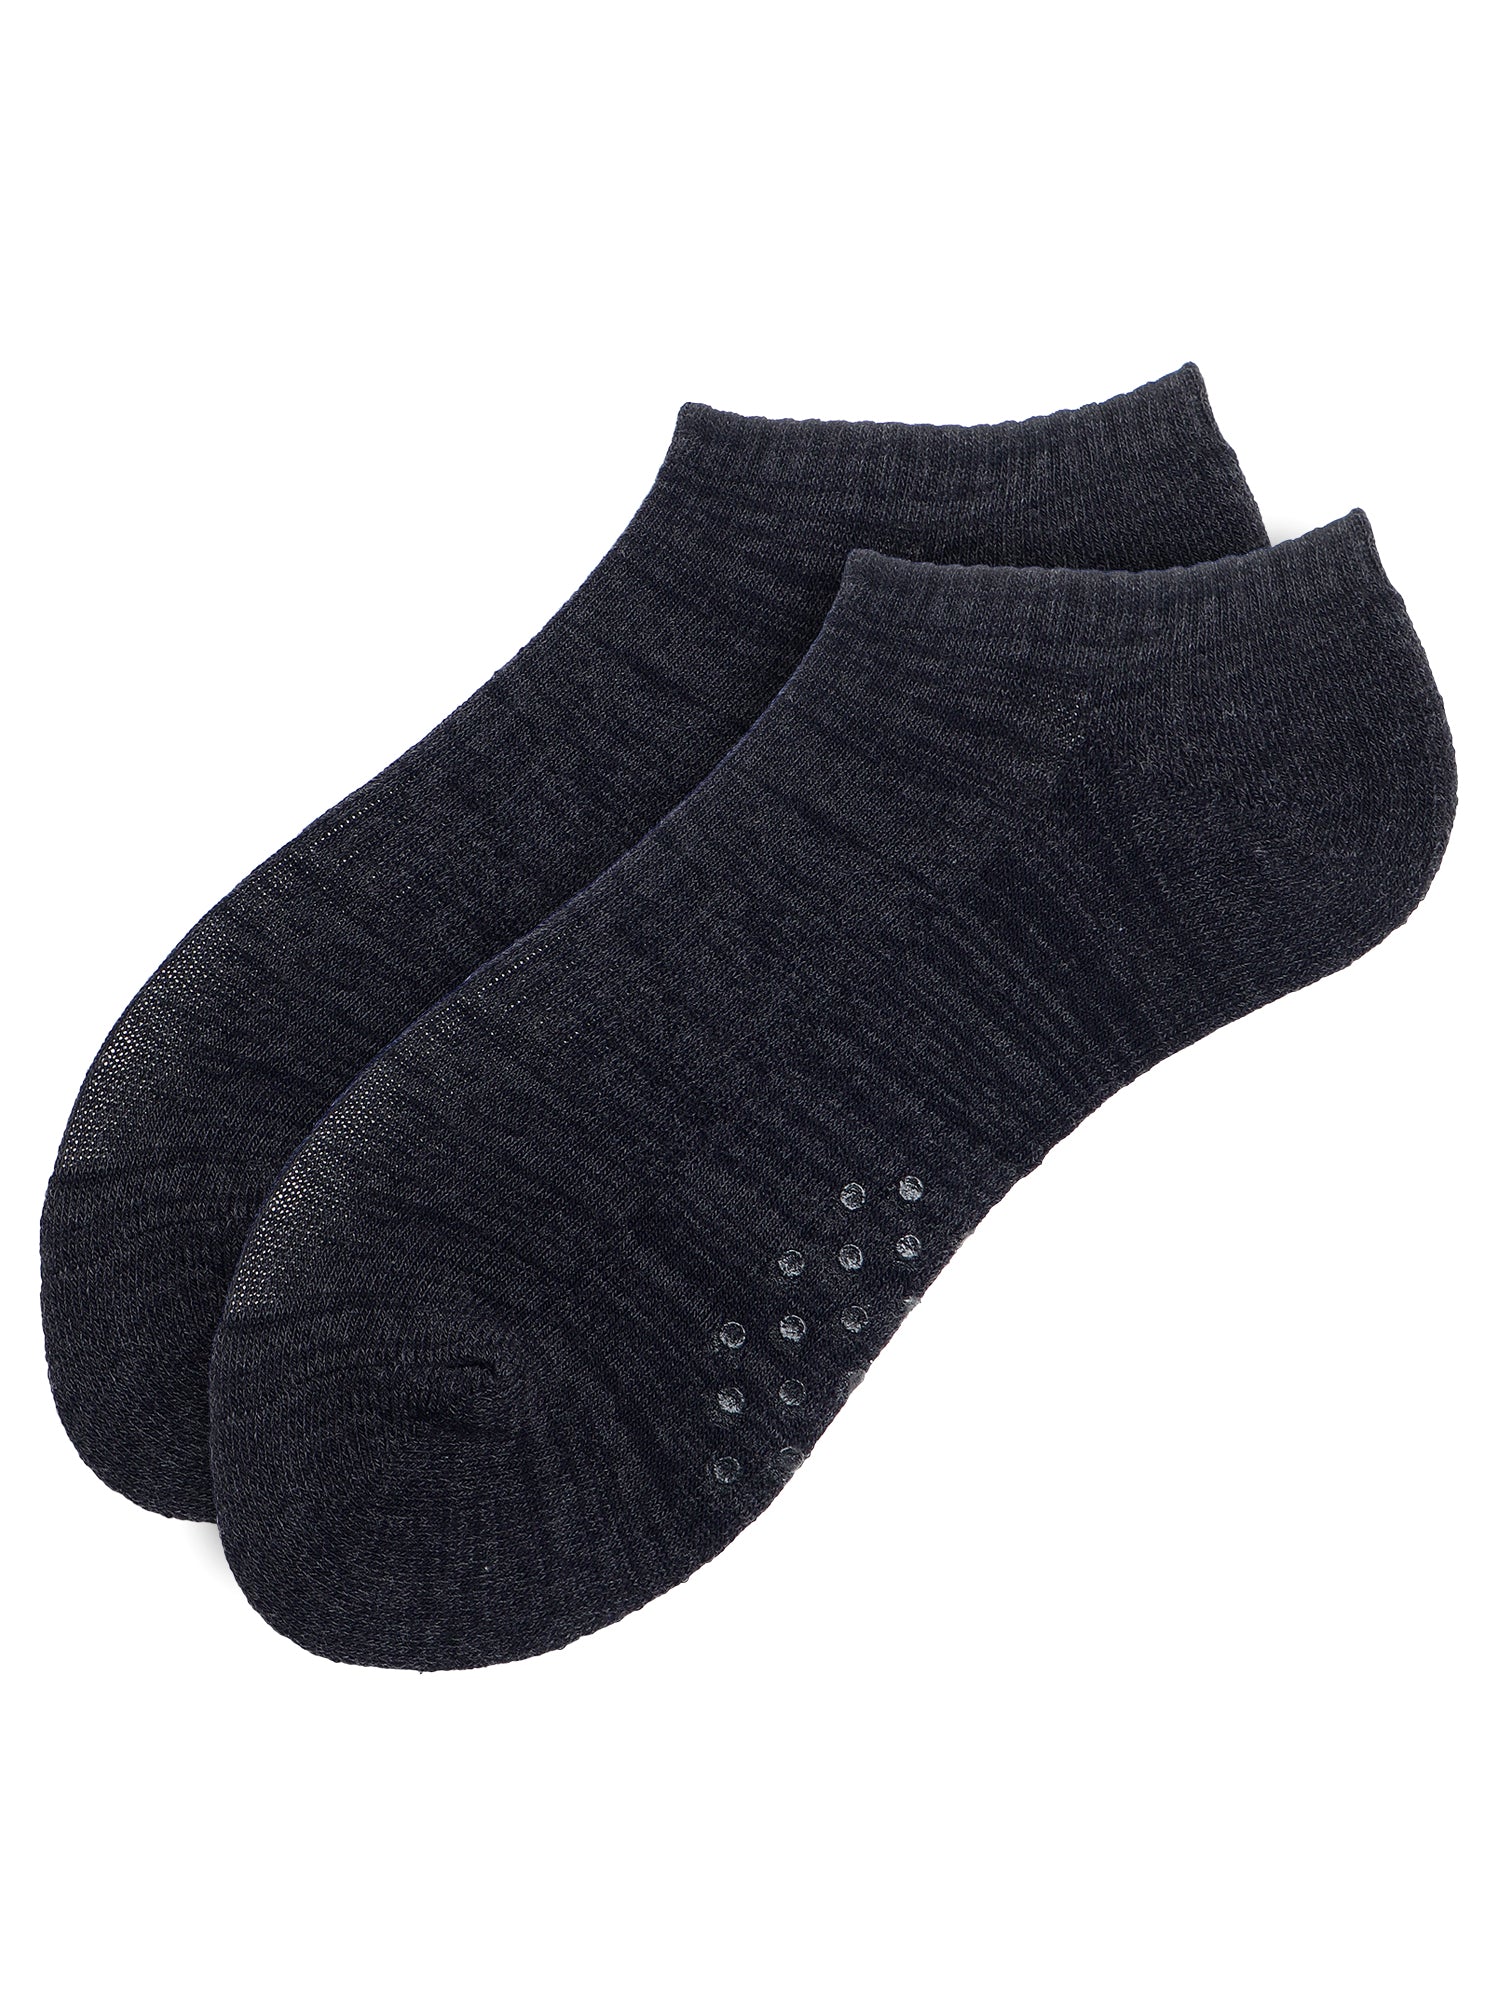 Grippers | The Ultimate Box Of 8 Pairs | Low Cut Lounging Socks